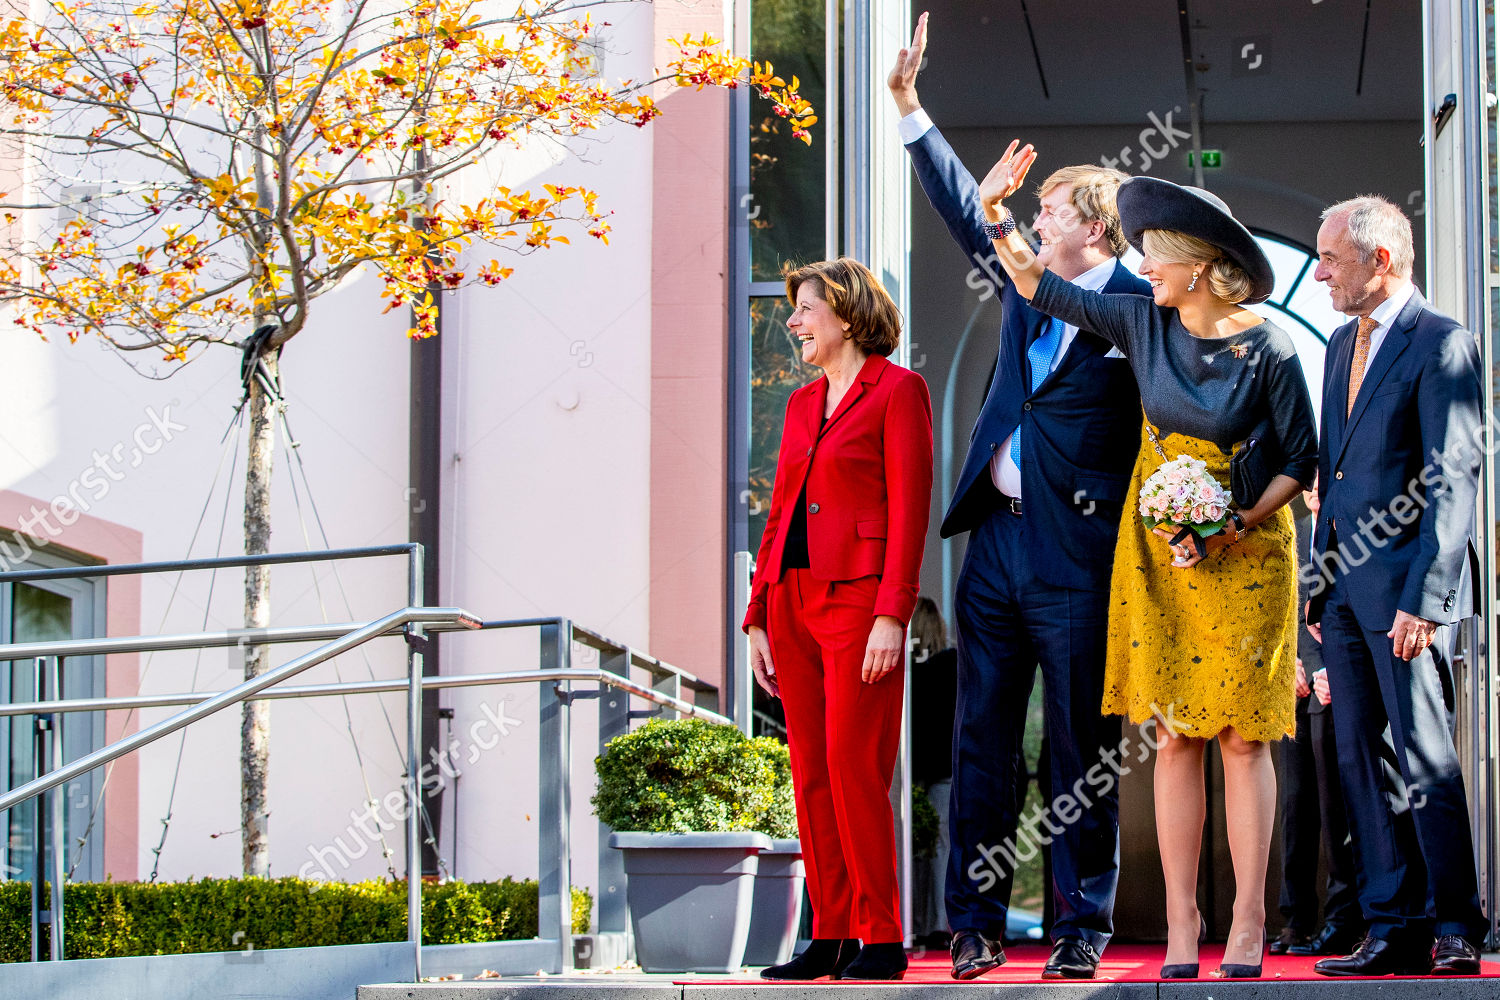 king-willem-alexander-and-queen-maxima-visit-to-germany-shutterstock-editorial-9921319i.jpg